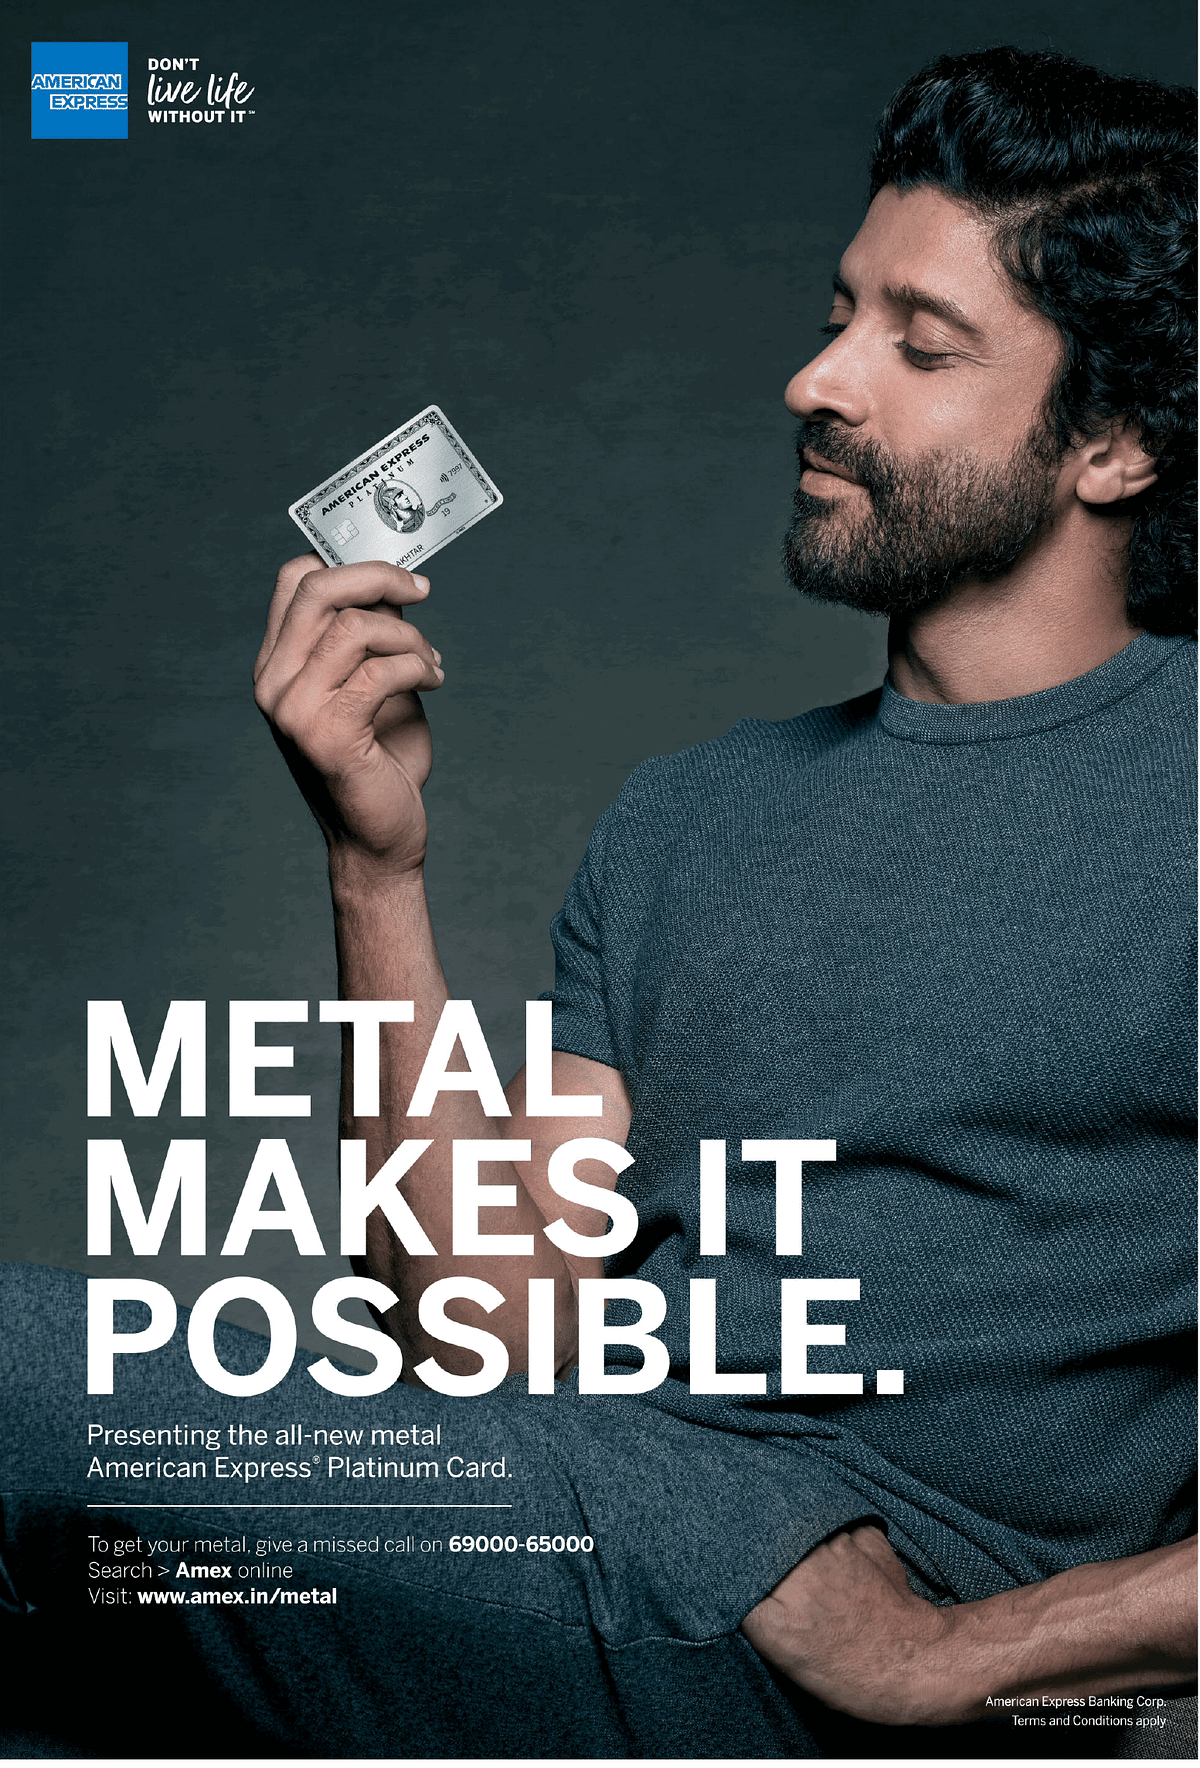 'Metal Makes It Possible' print ad.